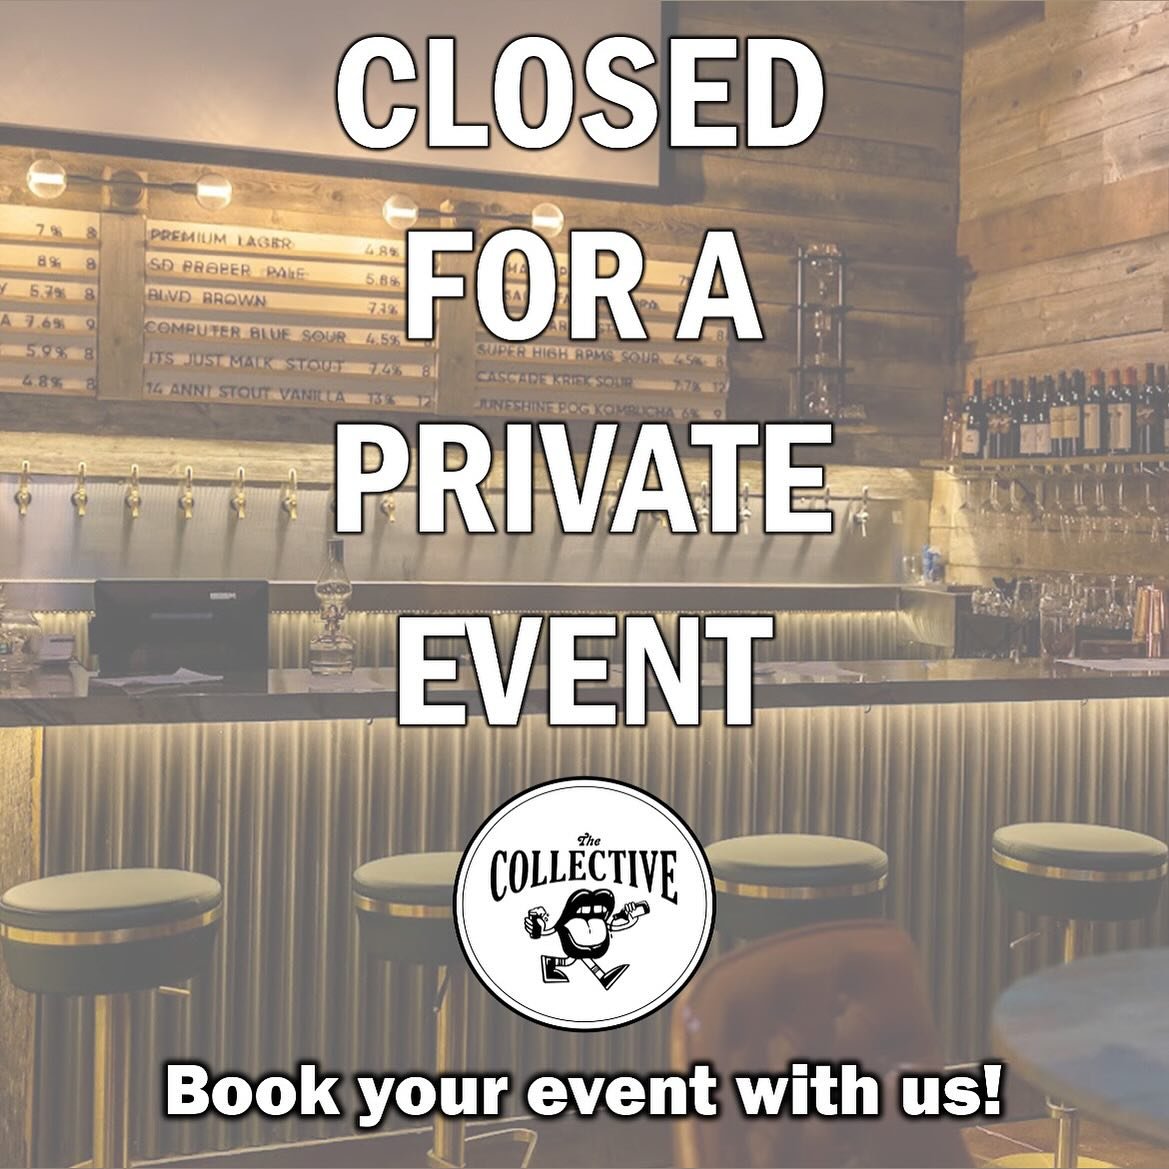 Fri &bull; Sat &bull; Sun - We are closed for multiple private events! We will see you next week! 

MON - Music Bingo
TUES - Trivia
WED - Jam Night
THURS - Open Mic 

#sandiego #california #pacificbeach #pb #sd